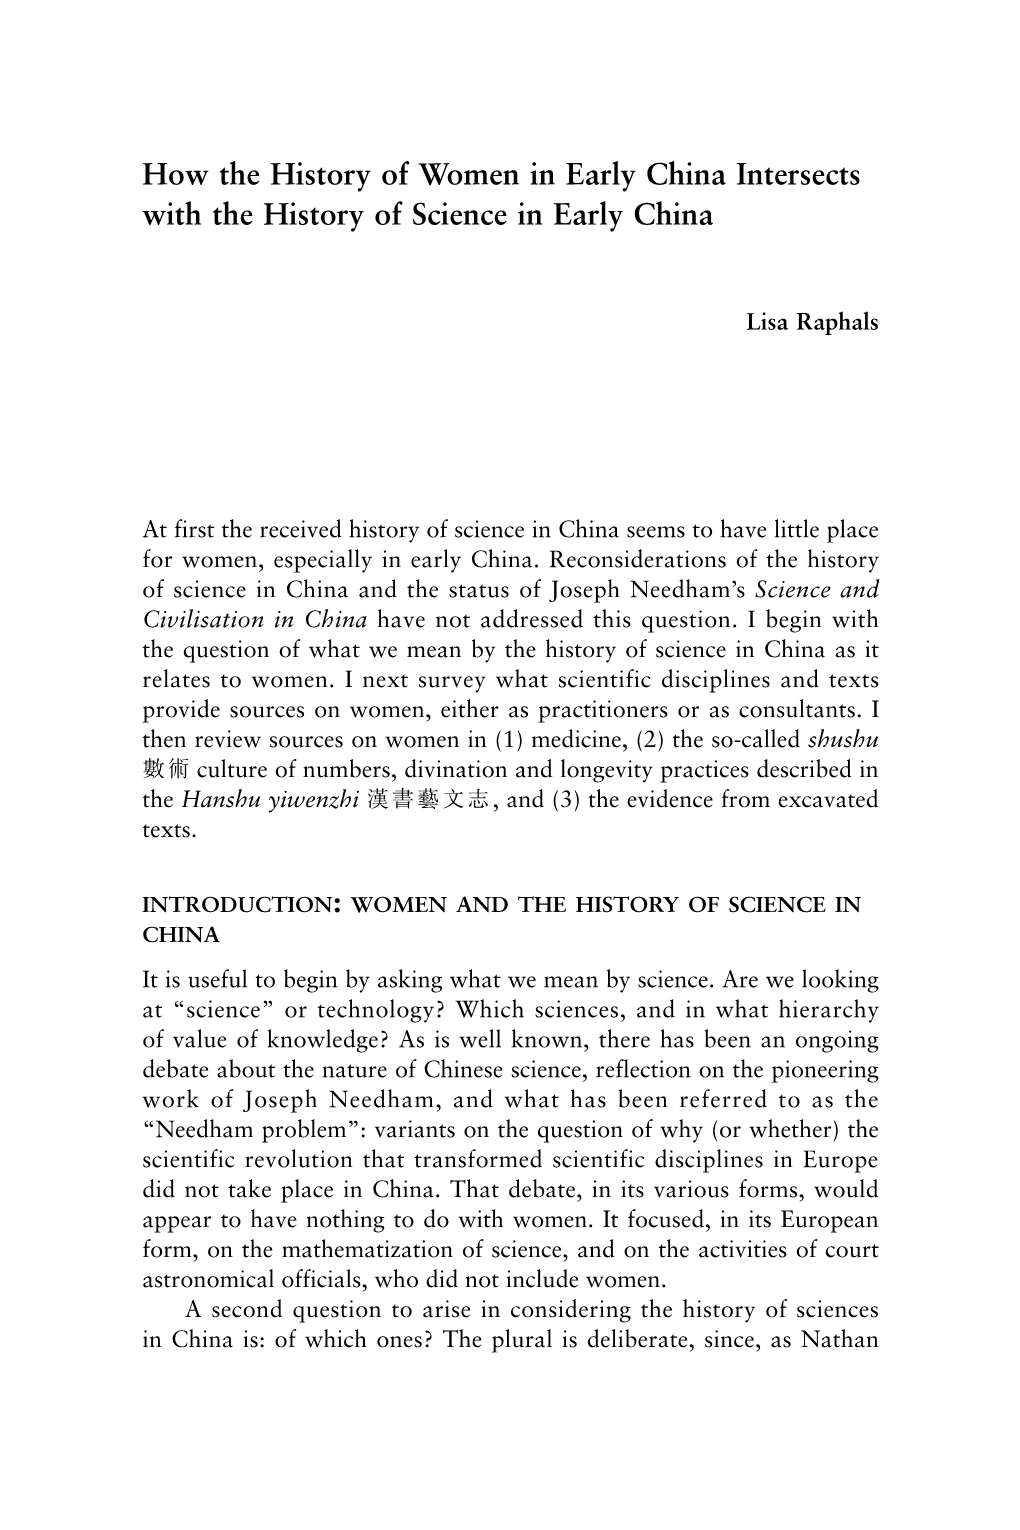 How the History of Women in Early China Intersects with the History of Science in Early China